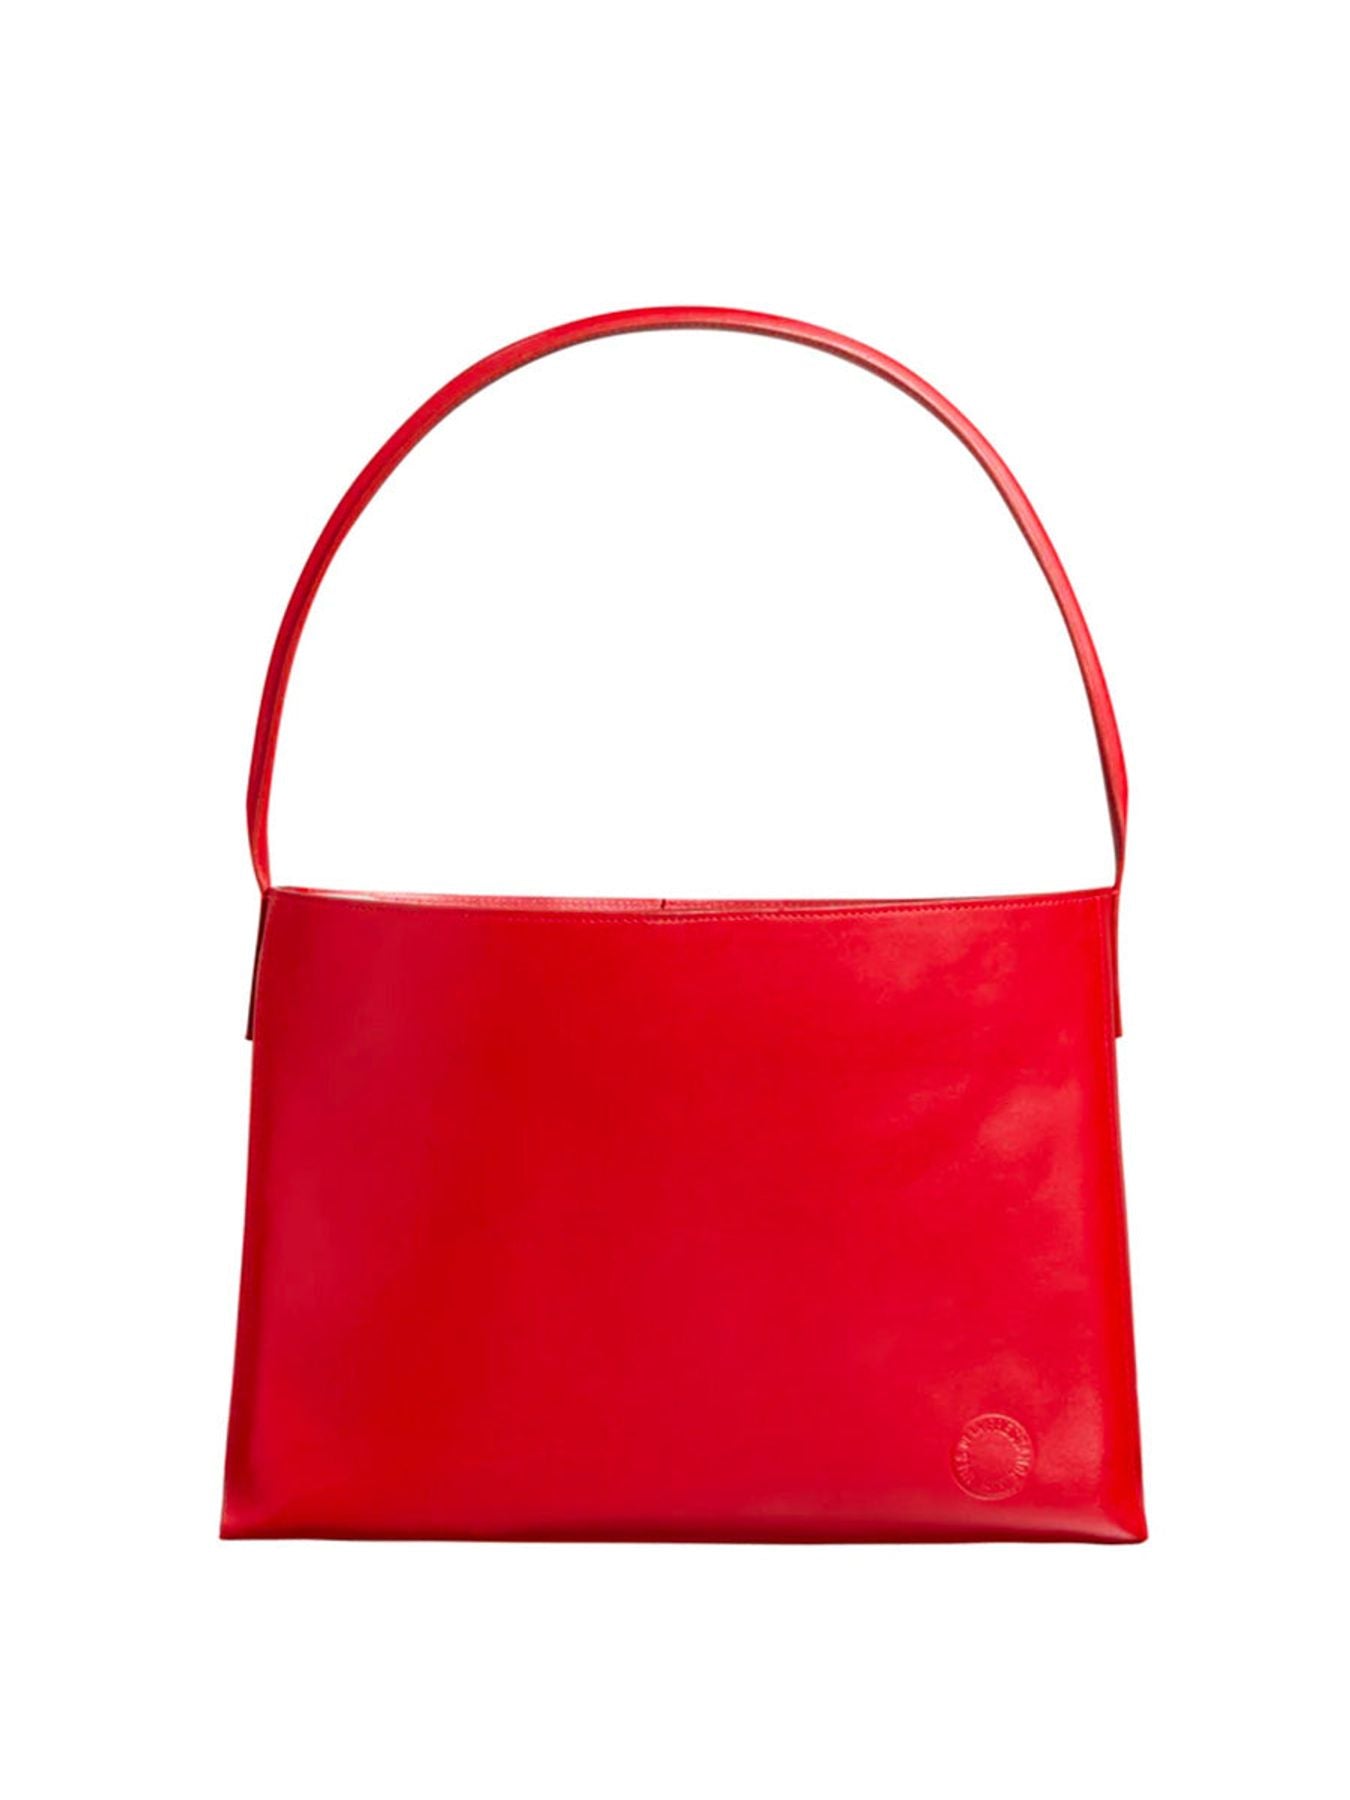 bag-leonore-l-cuir-red